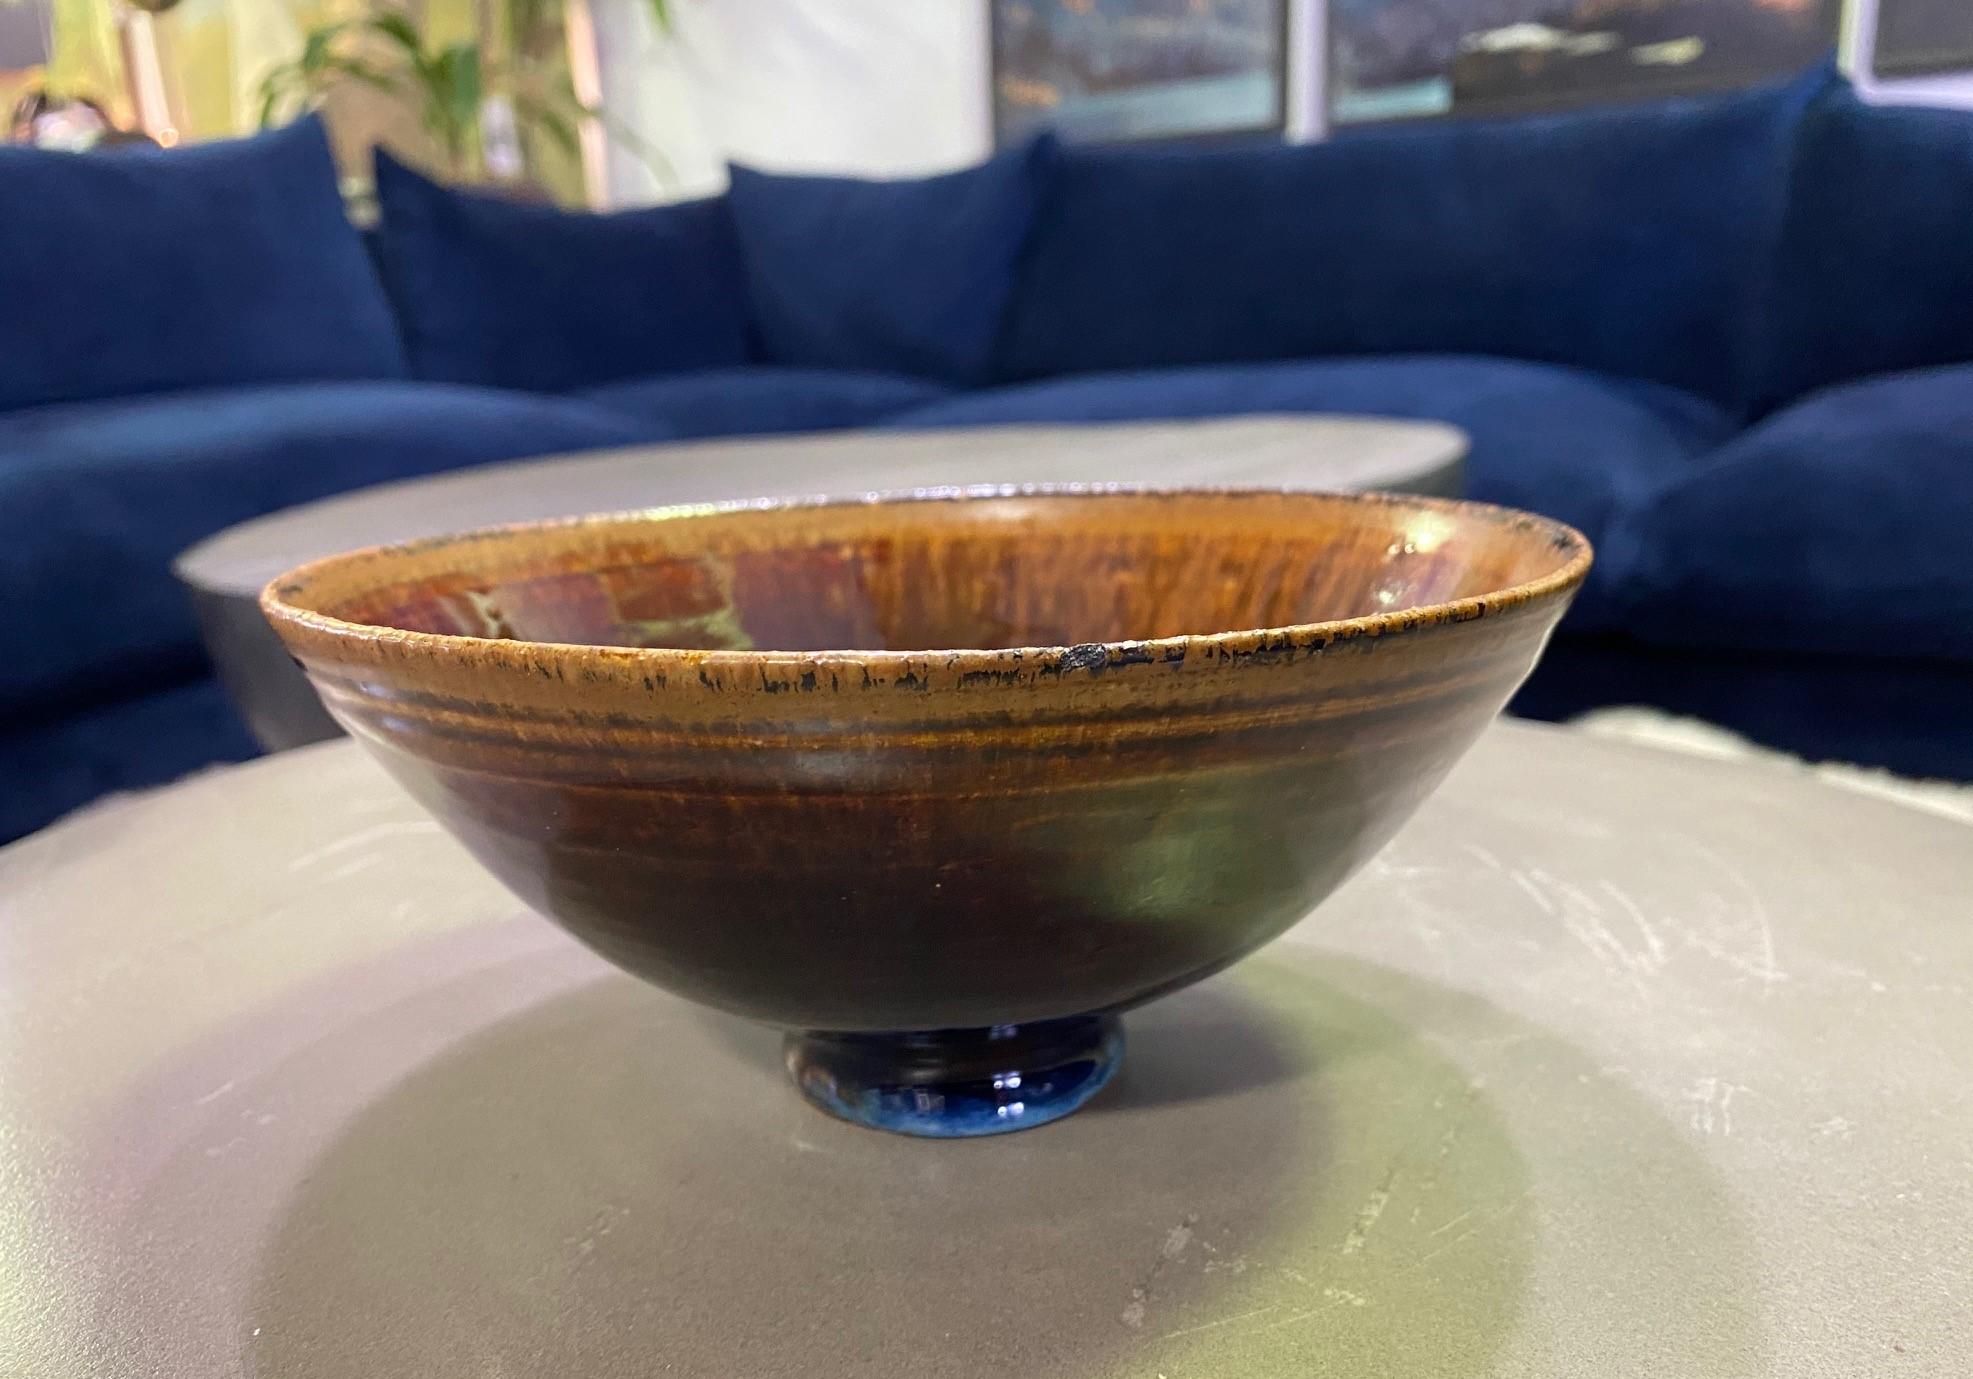 A gorgeously glazed pottery bowl by famed American master ceramist couple Mary and Edwin Scheier. The piece radiates in the light. 

The bowl is footed and has a beautiful brown-green tenmoku-like glaze. There is a smiley face at the center of the